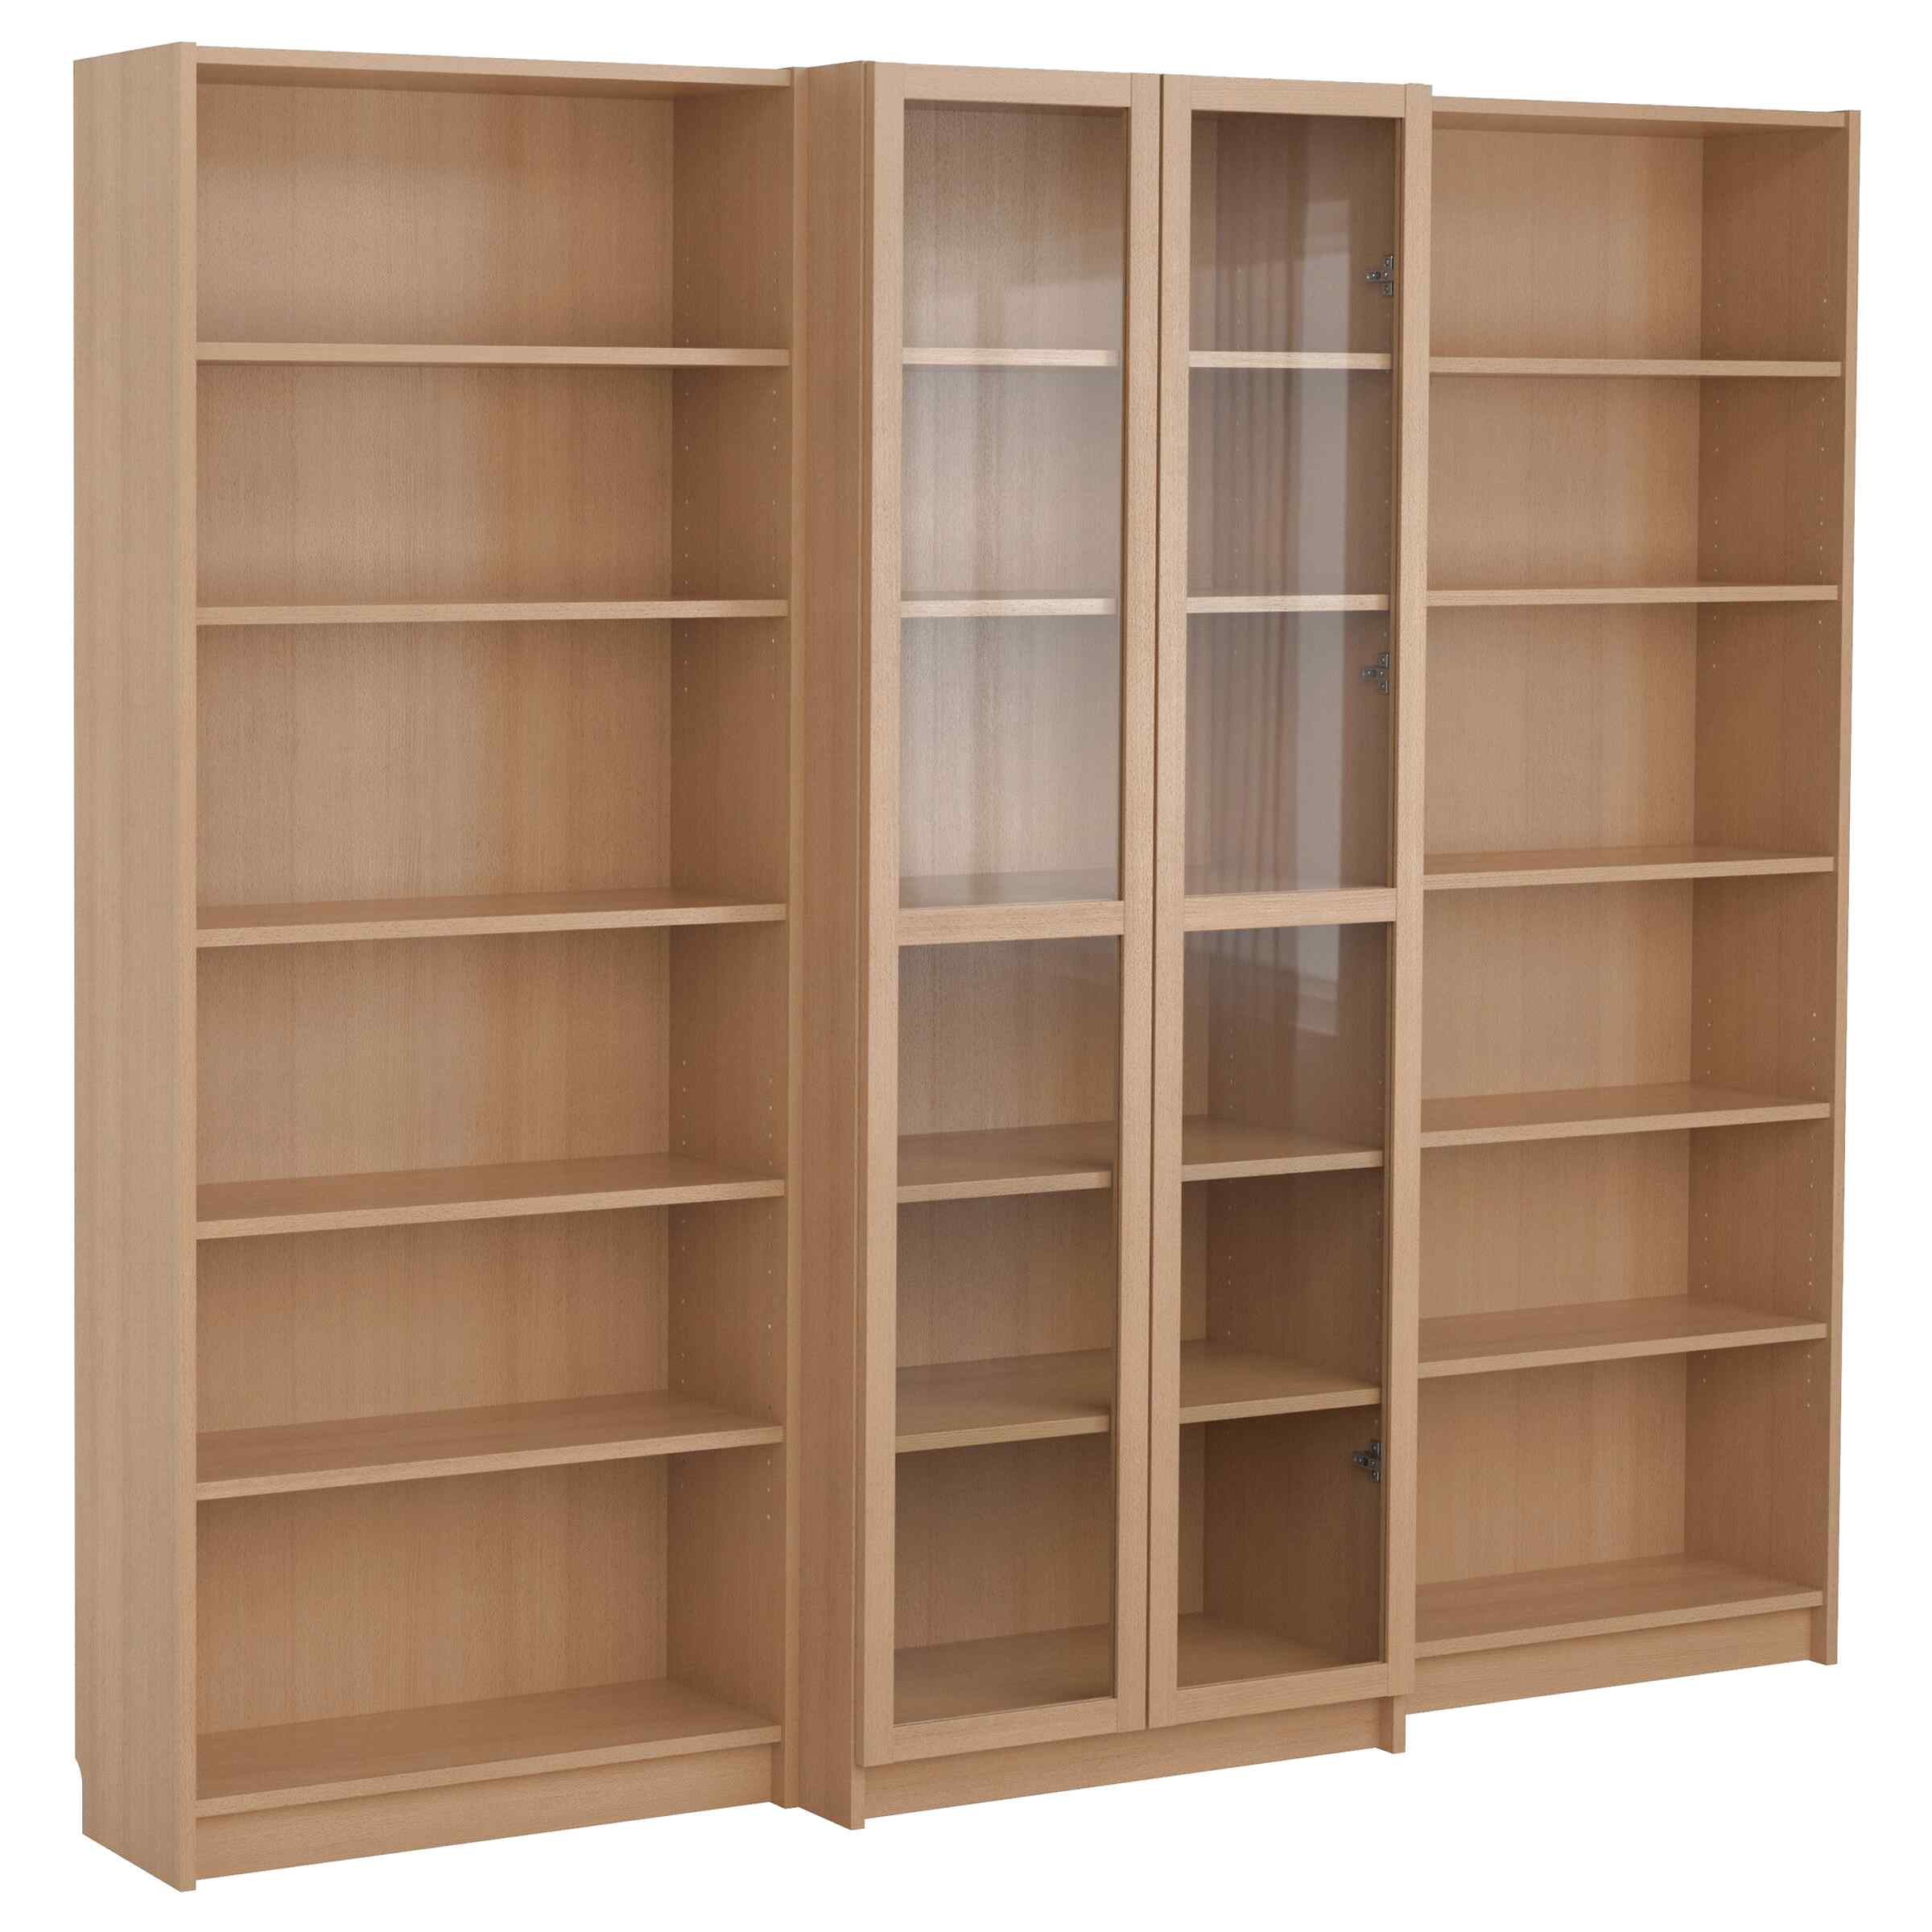 Ikea Billy Bookcase Beech For Sale In Uk View 28 Ads